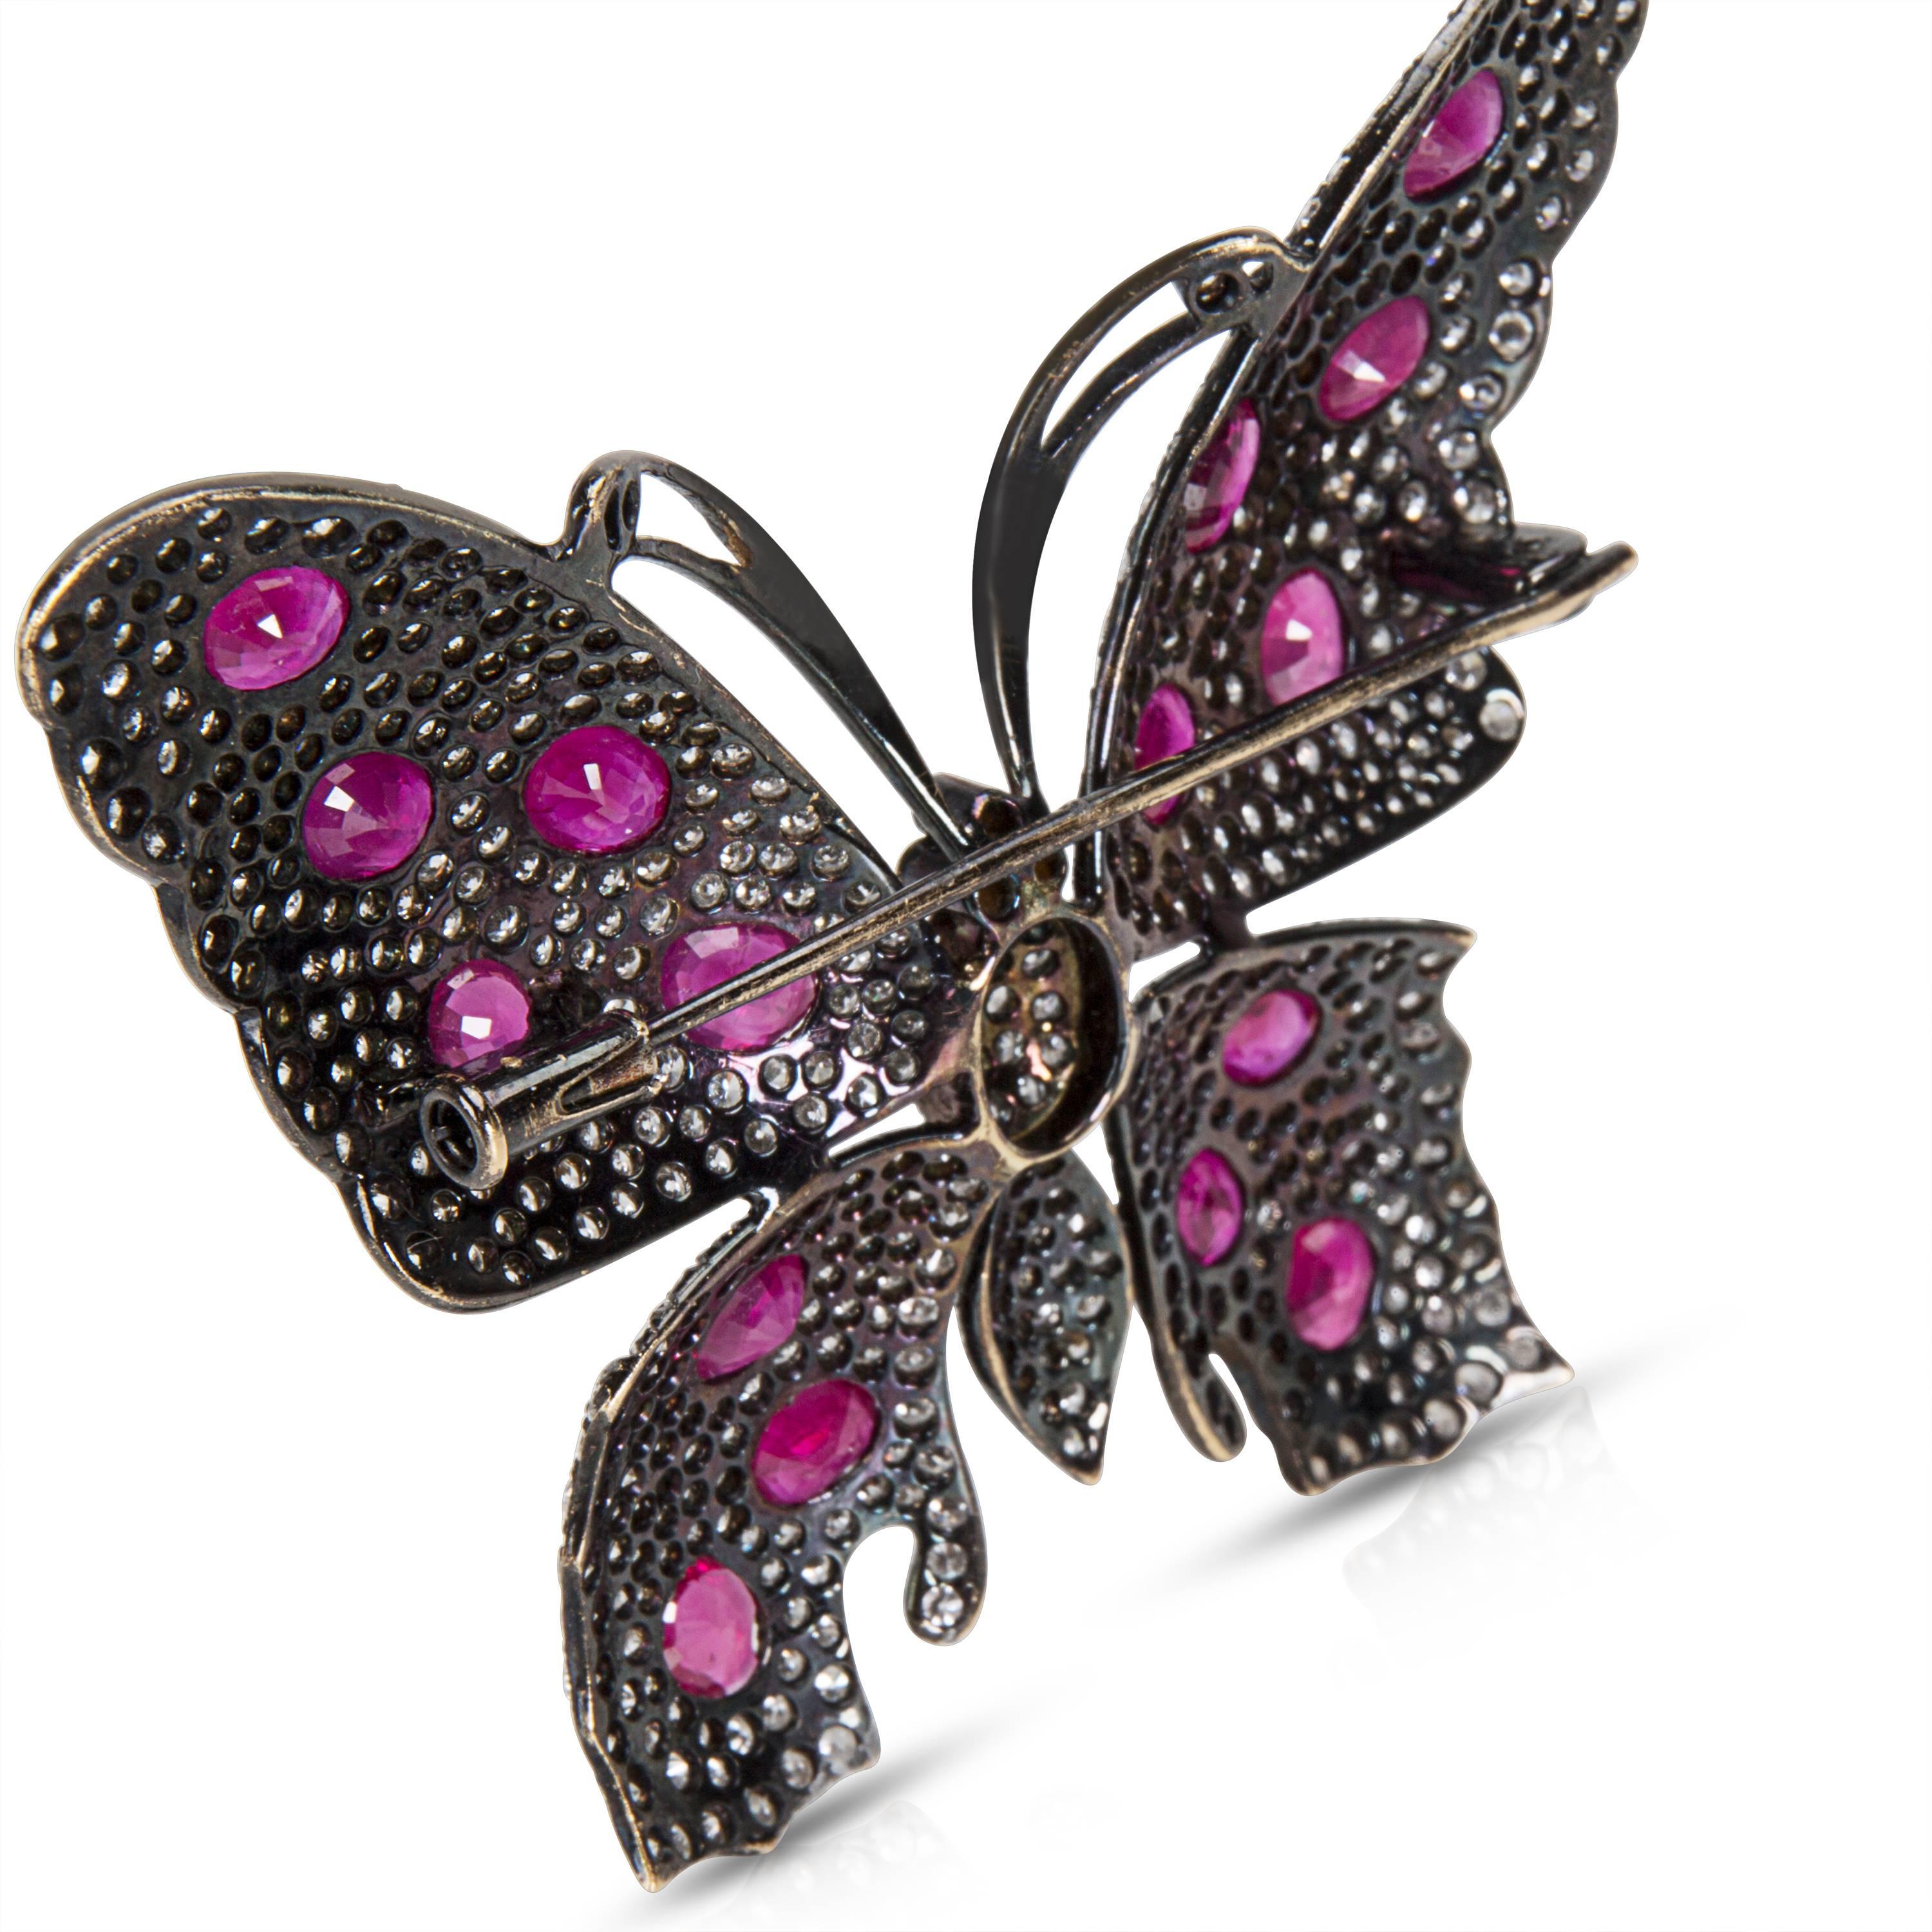 IGL Certified Diamond & Ruby Butterfly Brooch in 18k WG (6.25 CTW)

PRIMARY DETAILS
SKU: 022546
Listing Title: BRAND NEW IGL Certified Diamond & Ruby Butterfly Brooch in 18k WG (6.25 CTW)
Condition Description: Est. retail price 20,995 USD. Brand